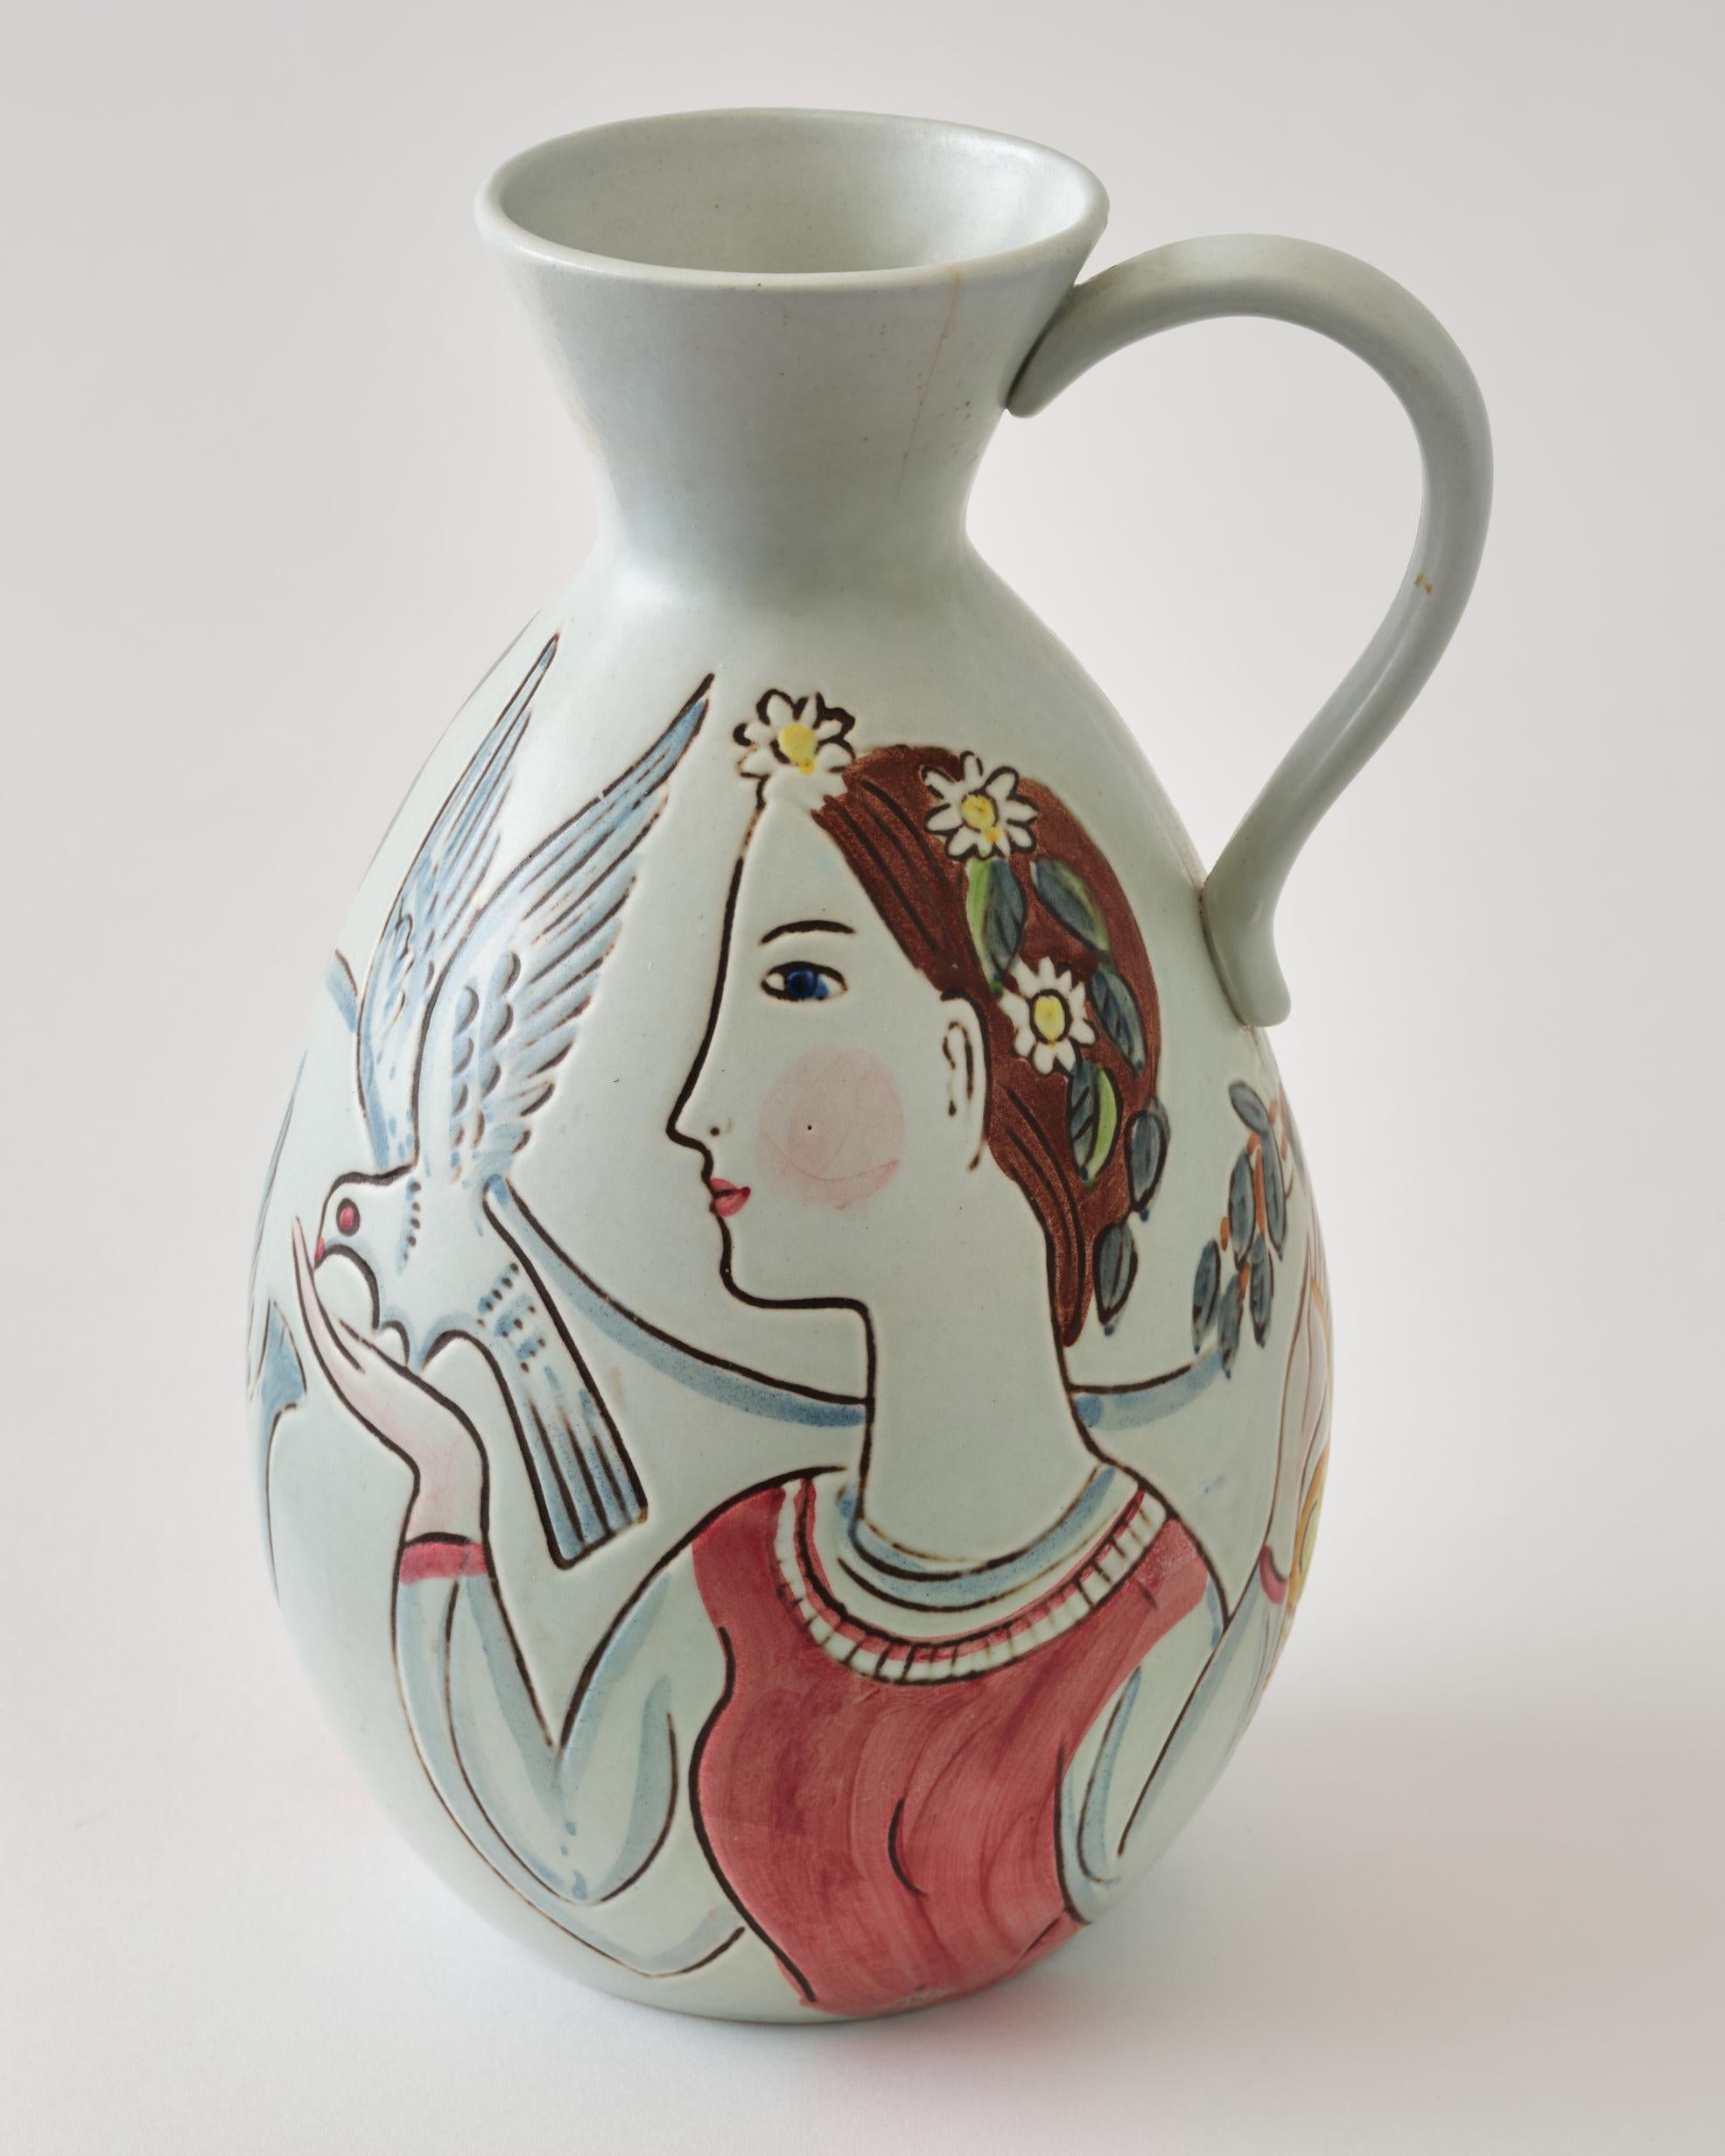 Beautiful vase by Cari-Harry Stalhane, Sweden, C 1950. Item is produced by Rorstrand Ceramic factory. 
The illustration show a woman with a bird and a man with a hunting gear.
Strong colors. The vase is signed.
The vase has a hair thin line from the